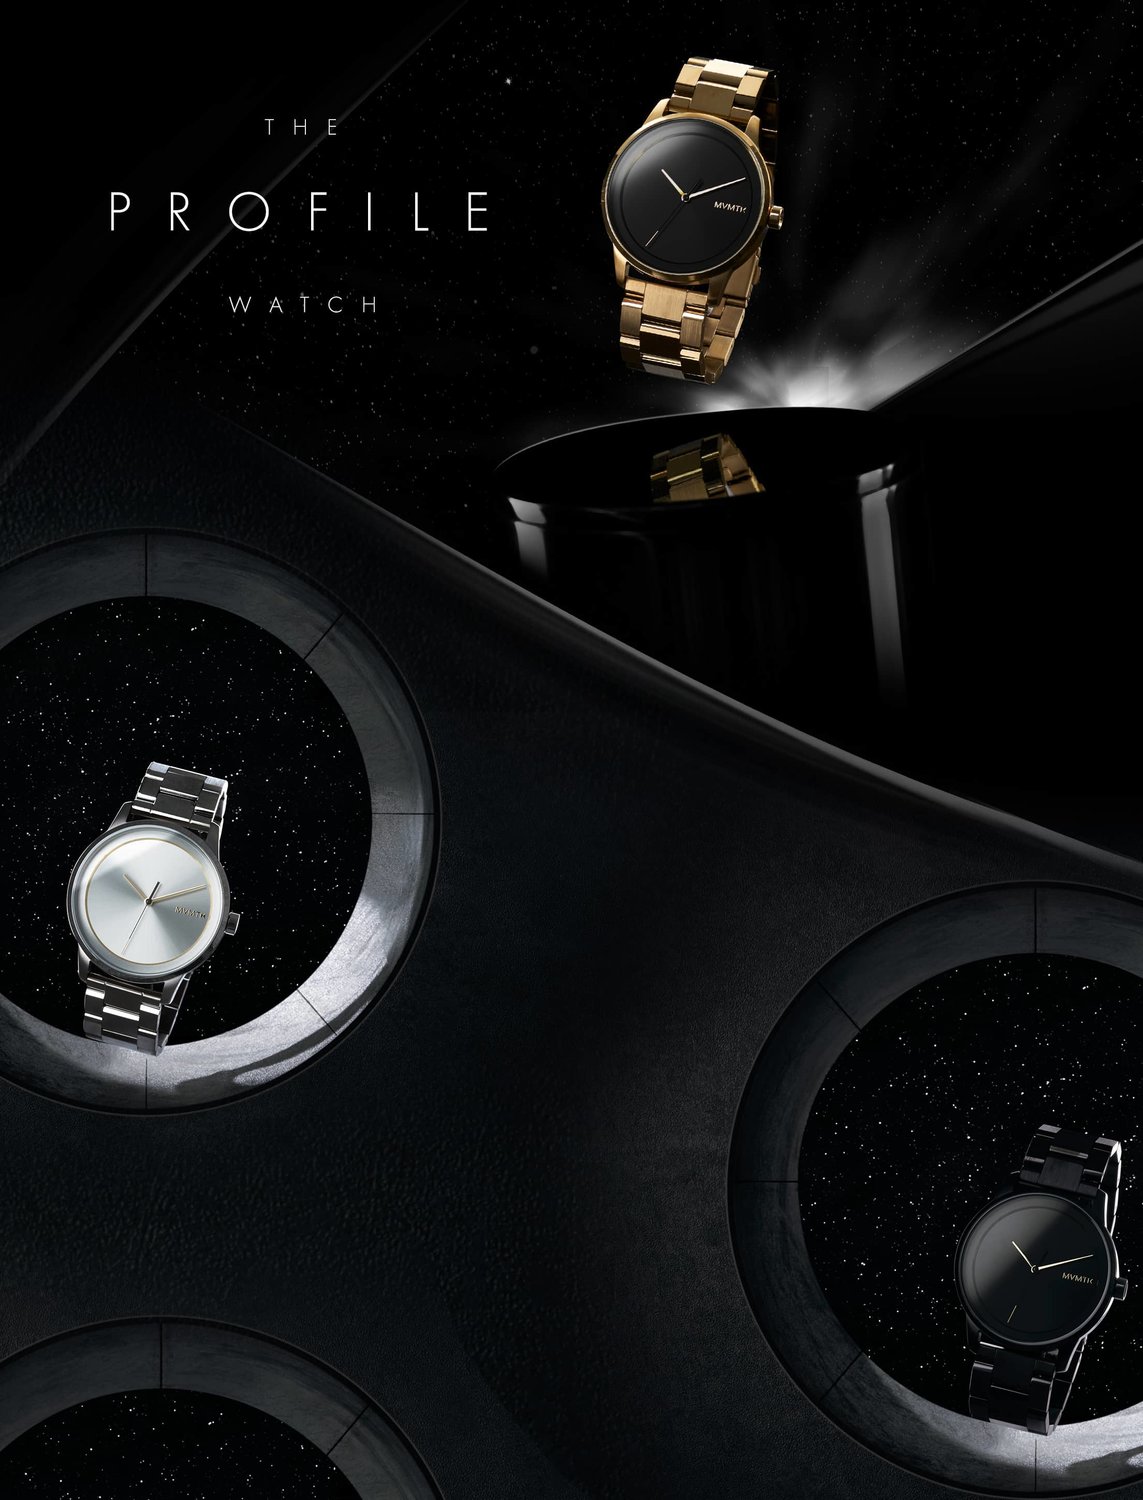 Featuring MVMT's New Profile Watch In Silver, Gold and Black